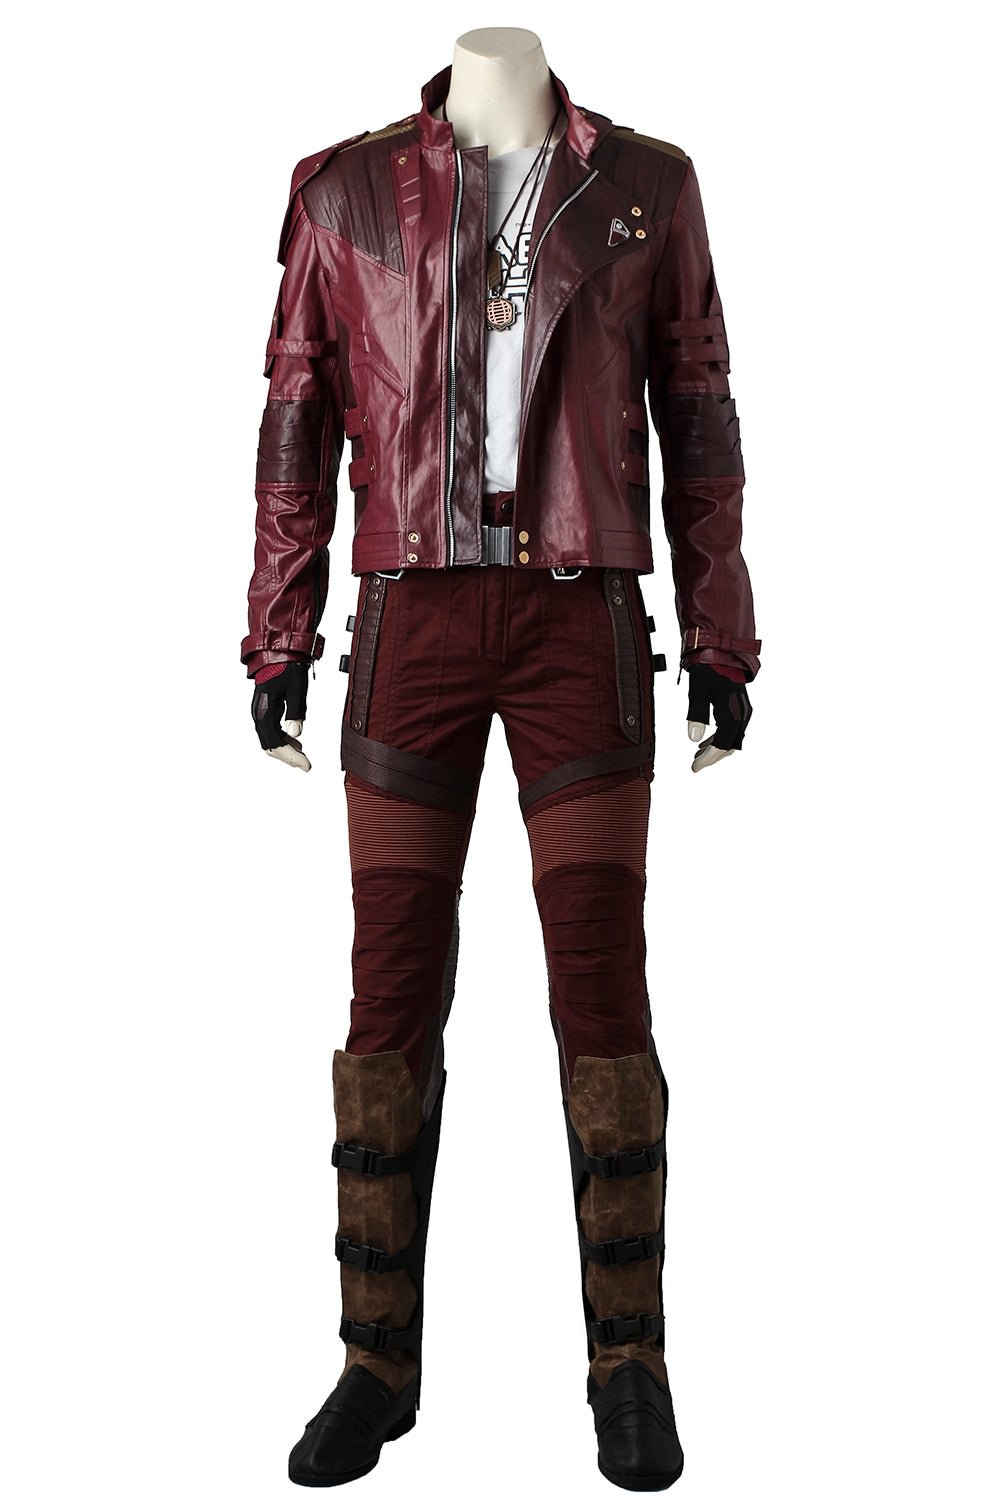 Marvel Avengers: Infinity War Guardians of the Galaxy Vol. 2 Star-Lord Peter Jason Quill Cosplay Costume